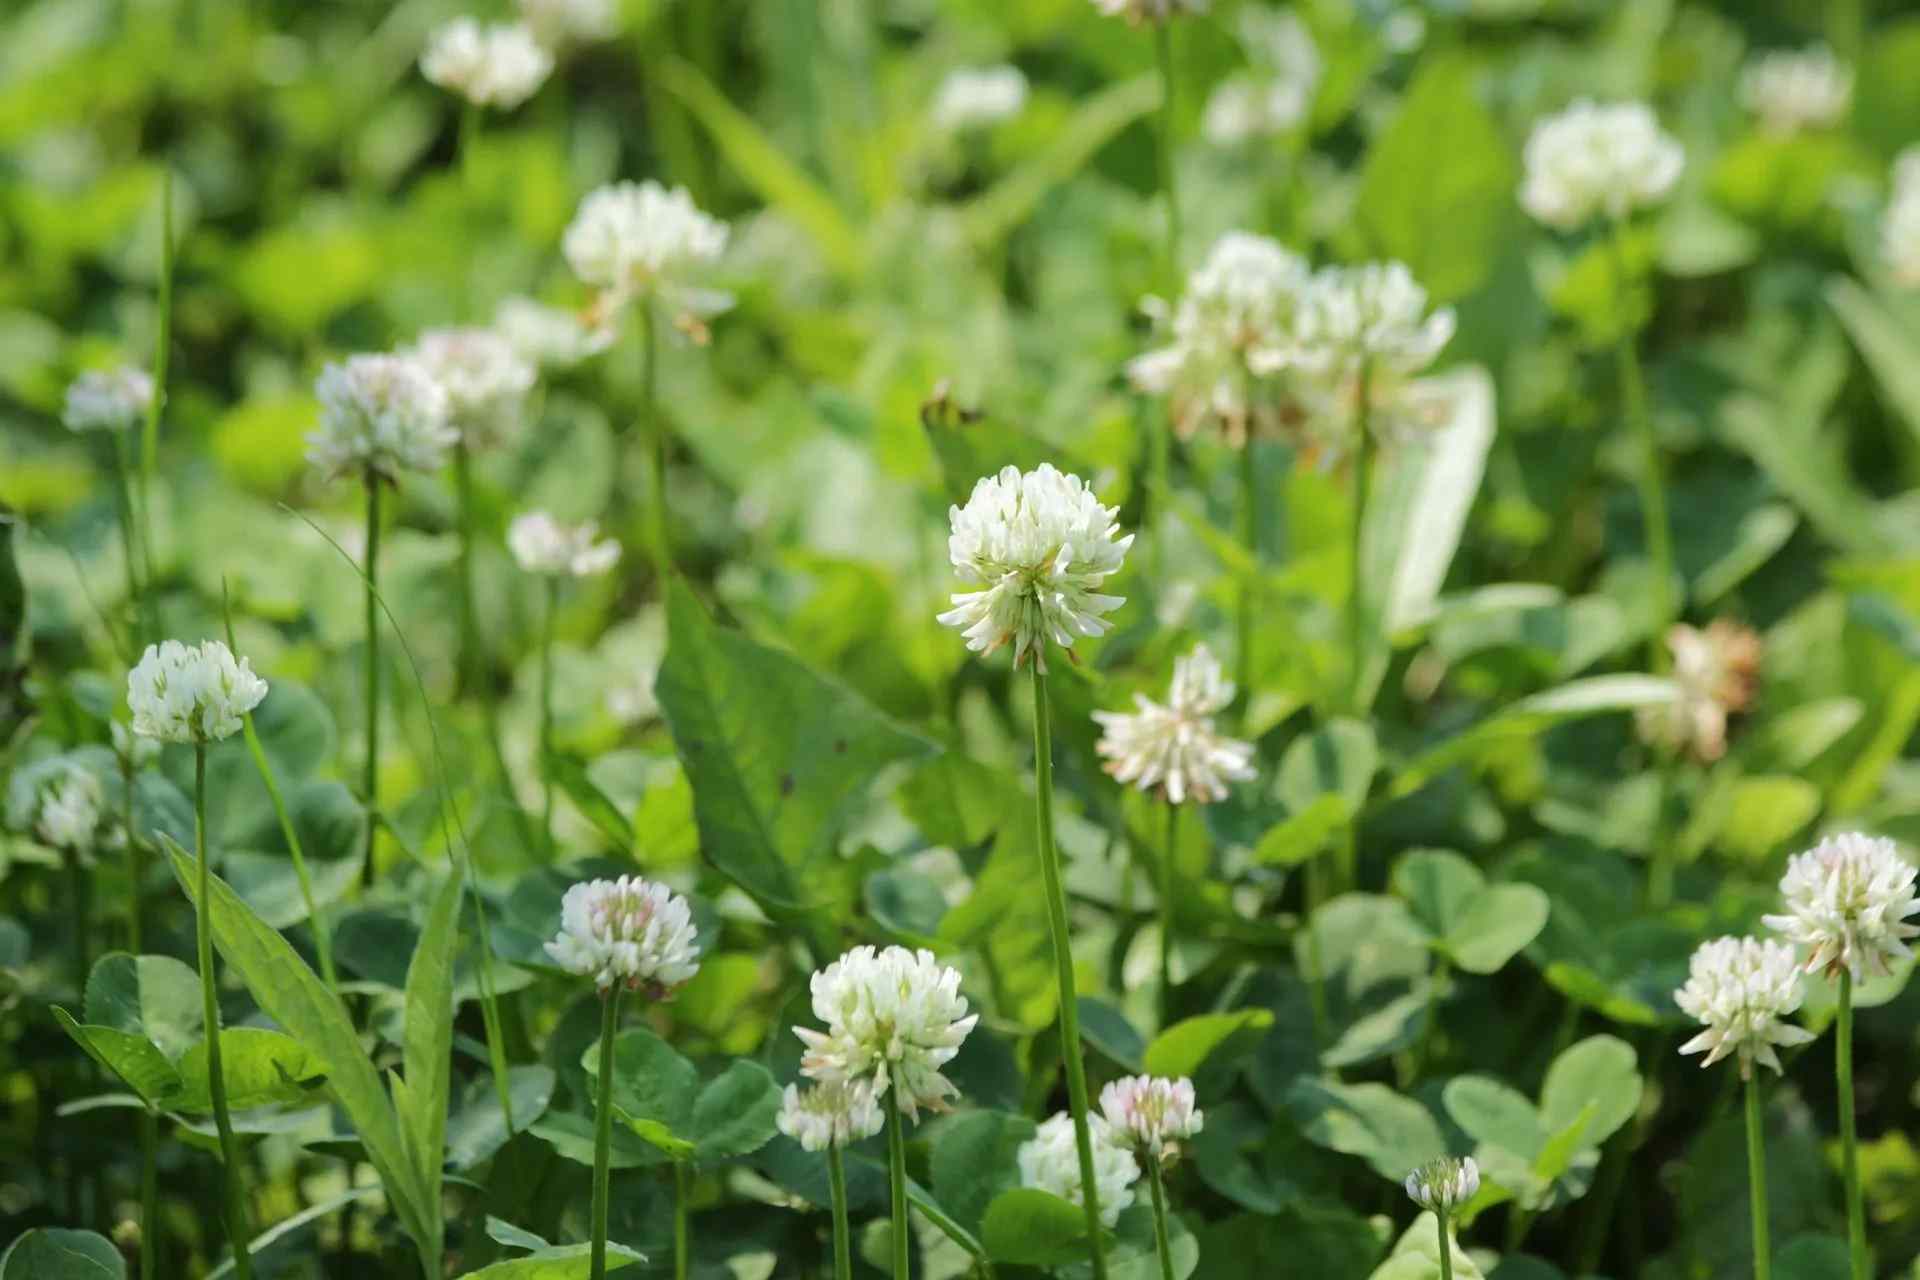 White Clover is also used in some modern medicines.